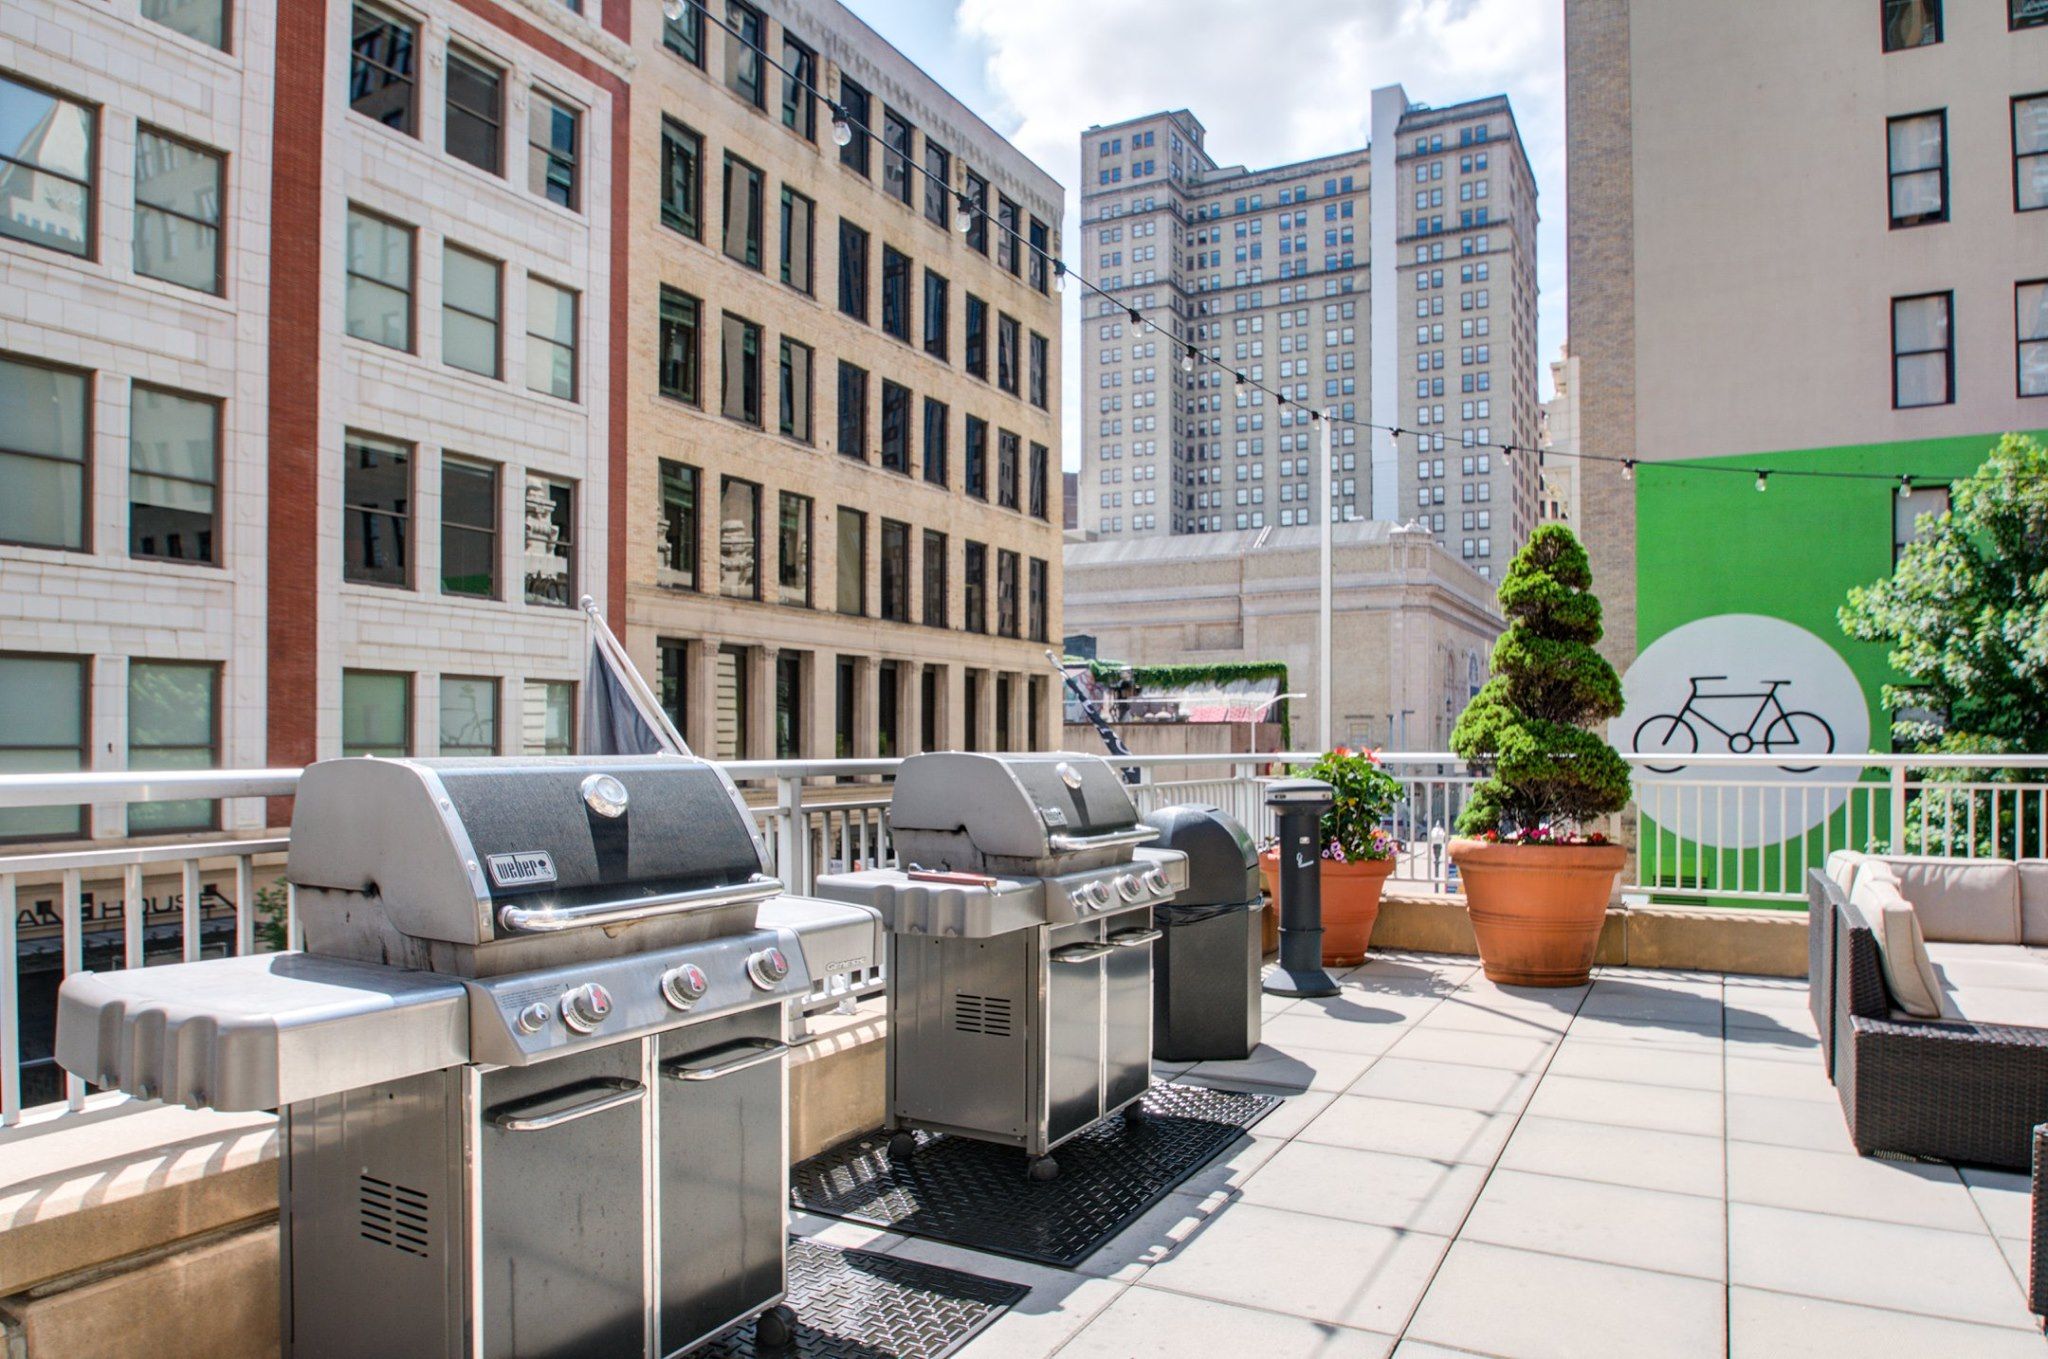 Grills on the apartment's terrace